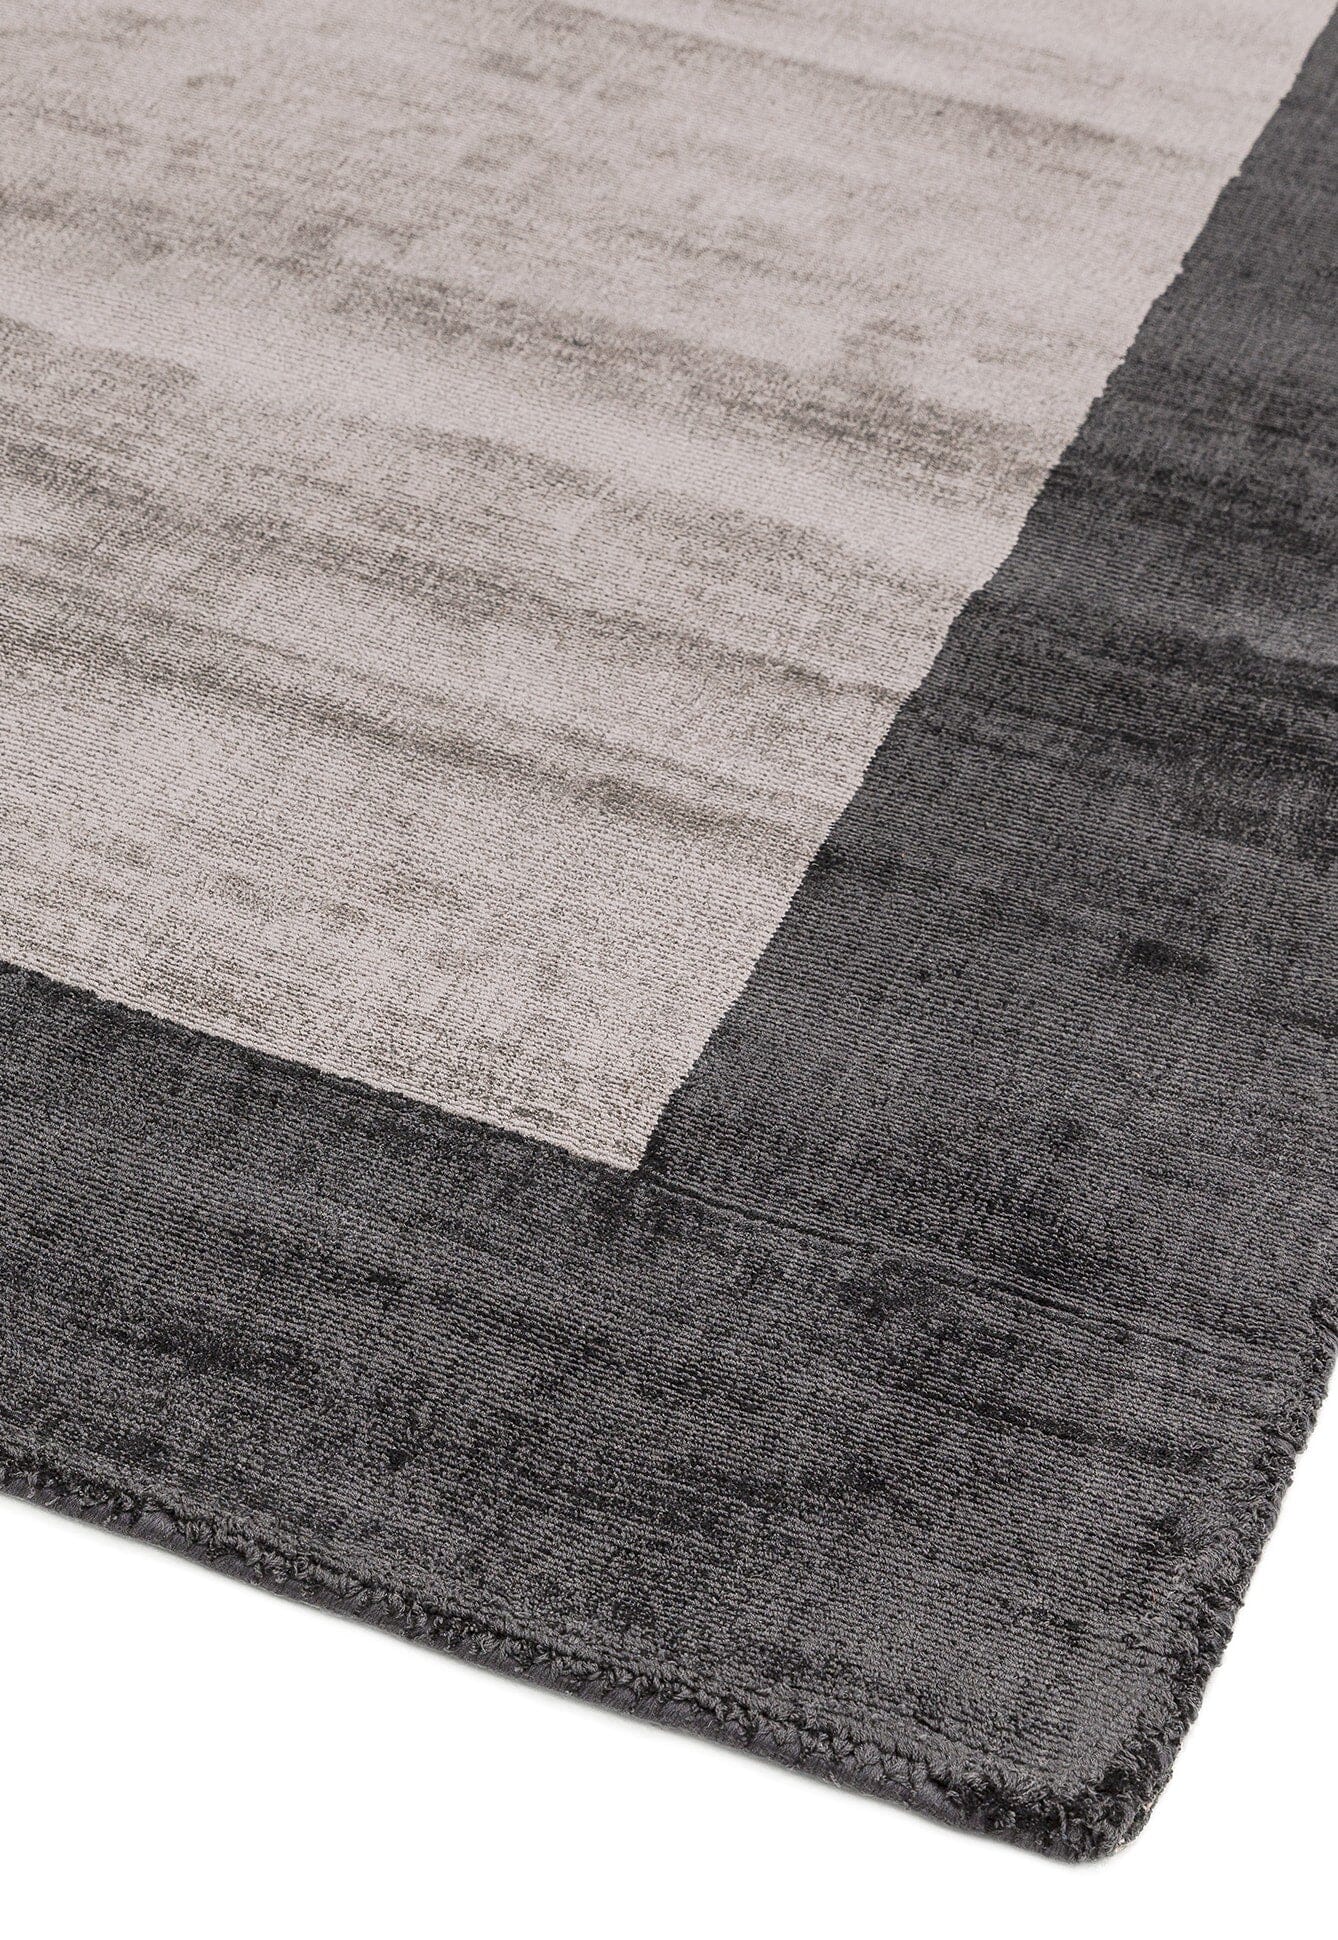 Asiatic Carpets Blade Hand Woven Rug Charcoal Silver - 160 x 160cm